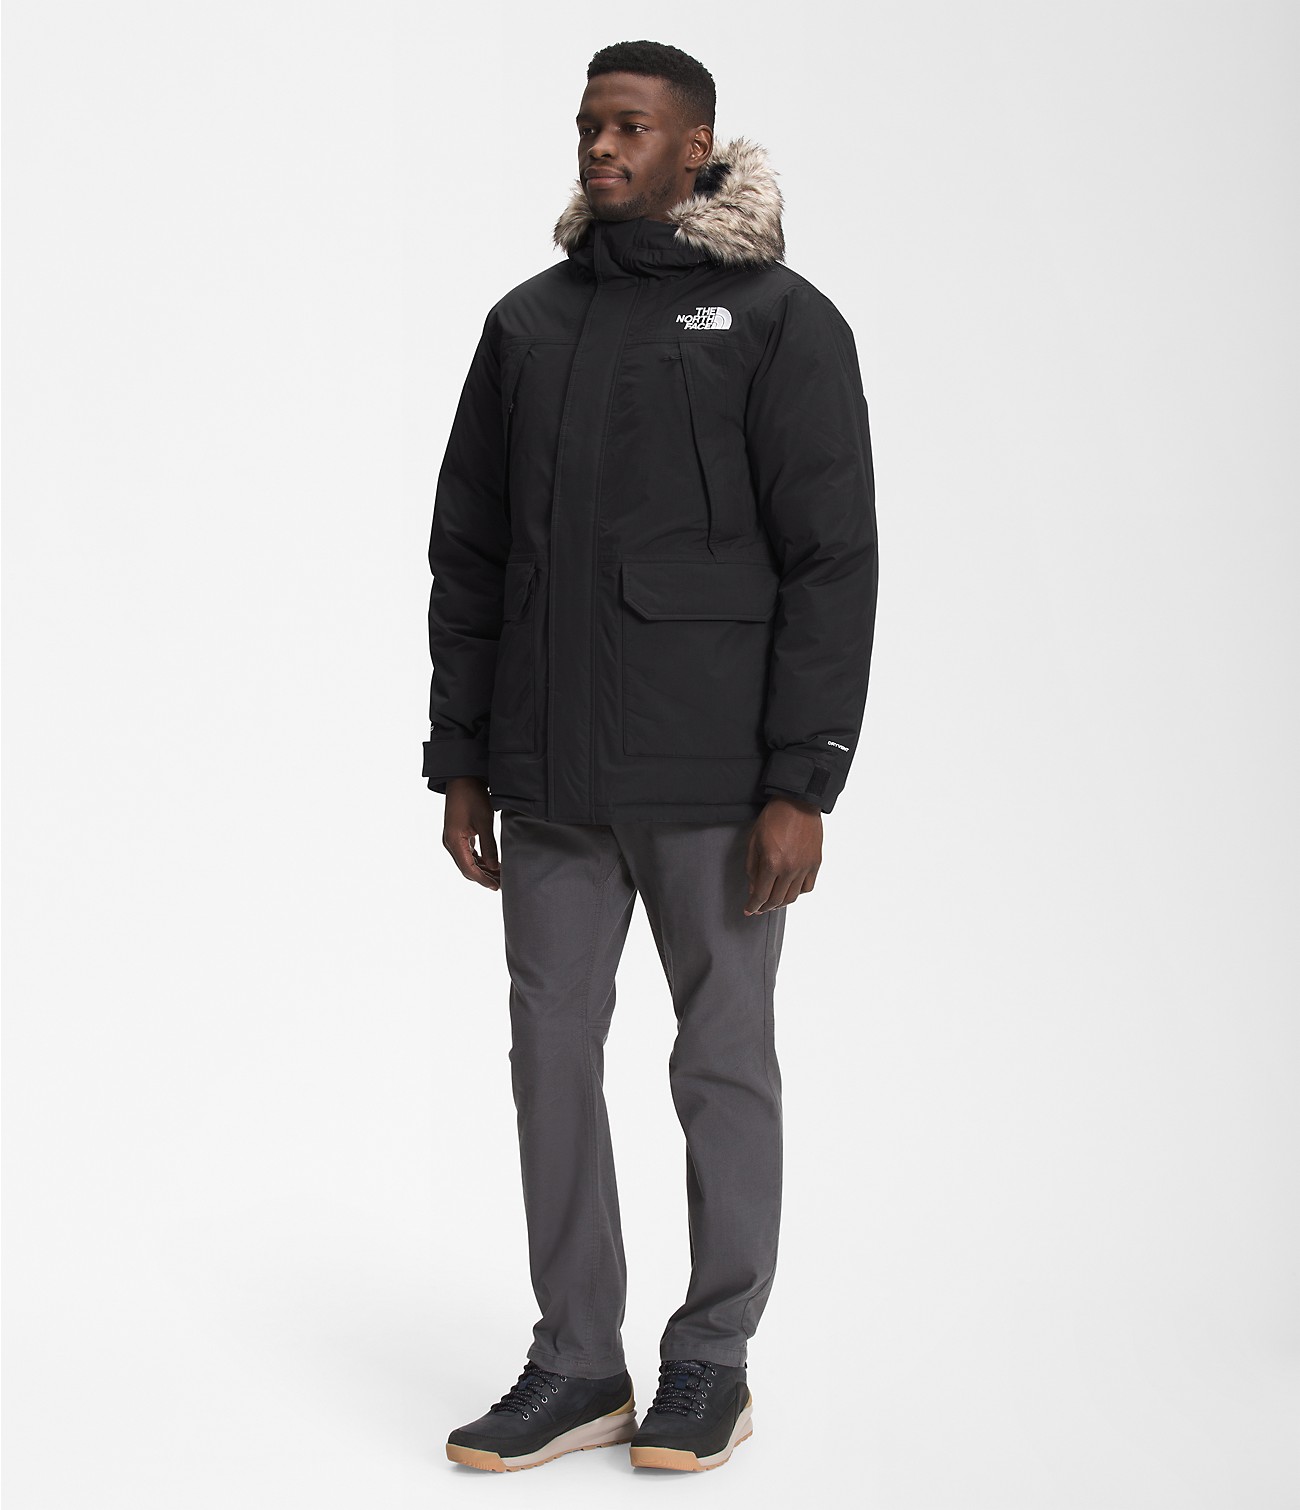 Unlock Wilderness' choice in the Moncler Vs North Face comparison, the McMurdo Parka by The North Face